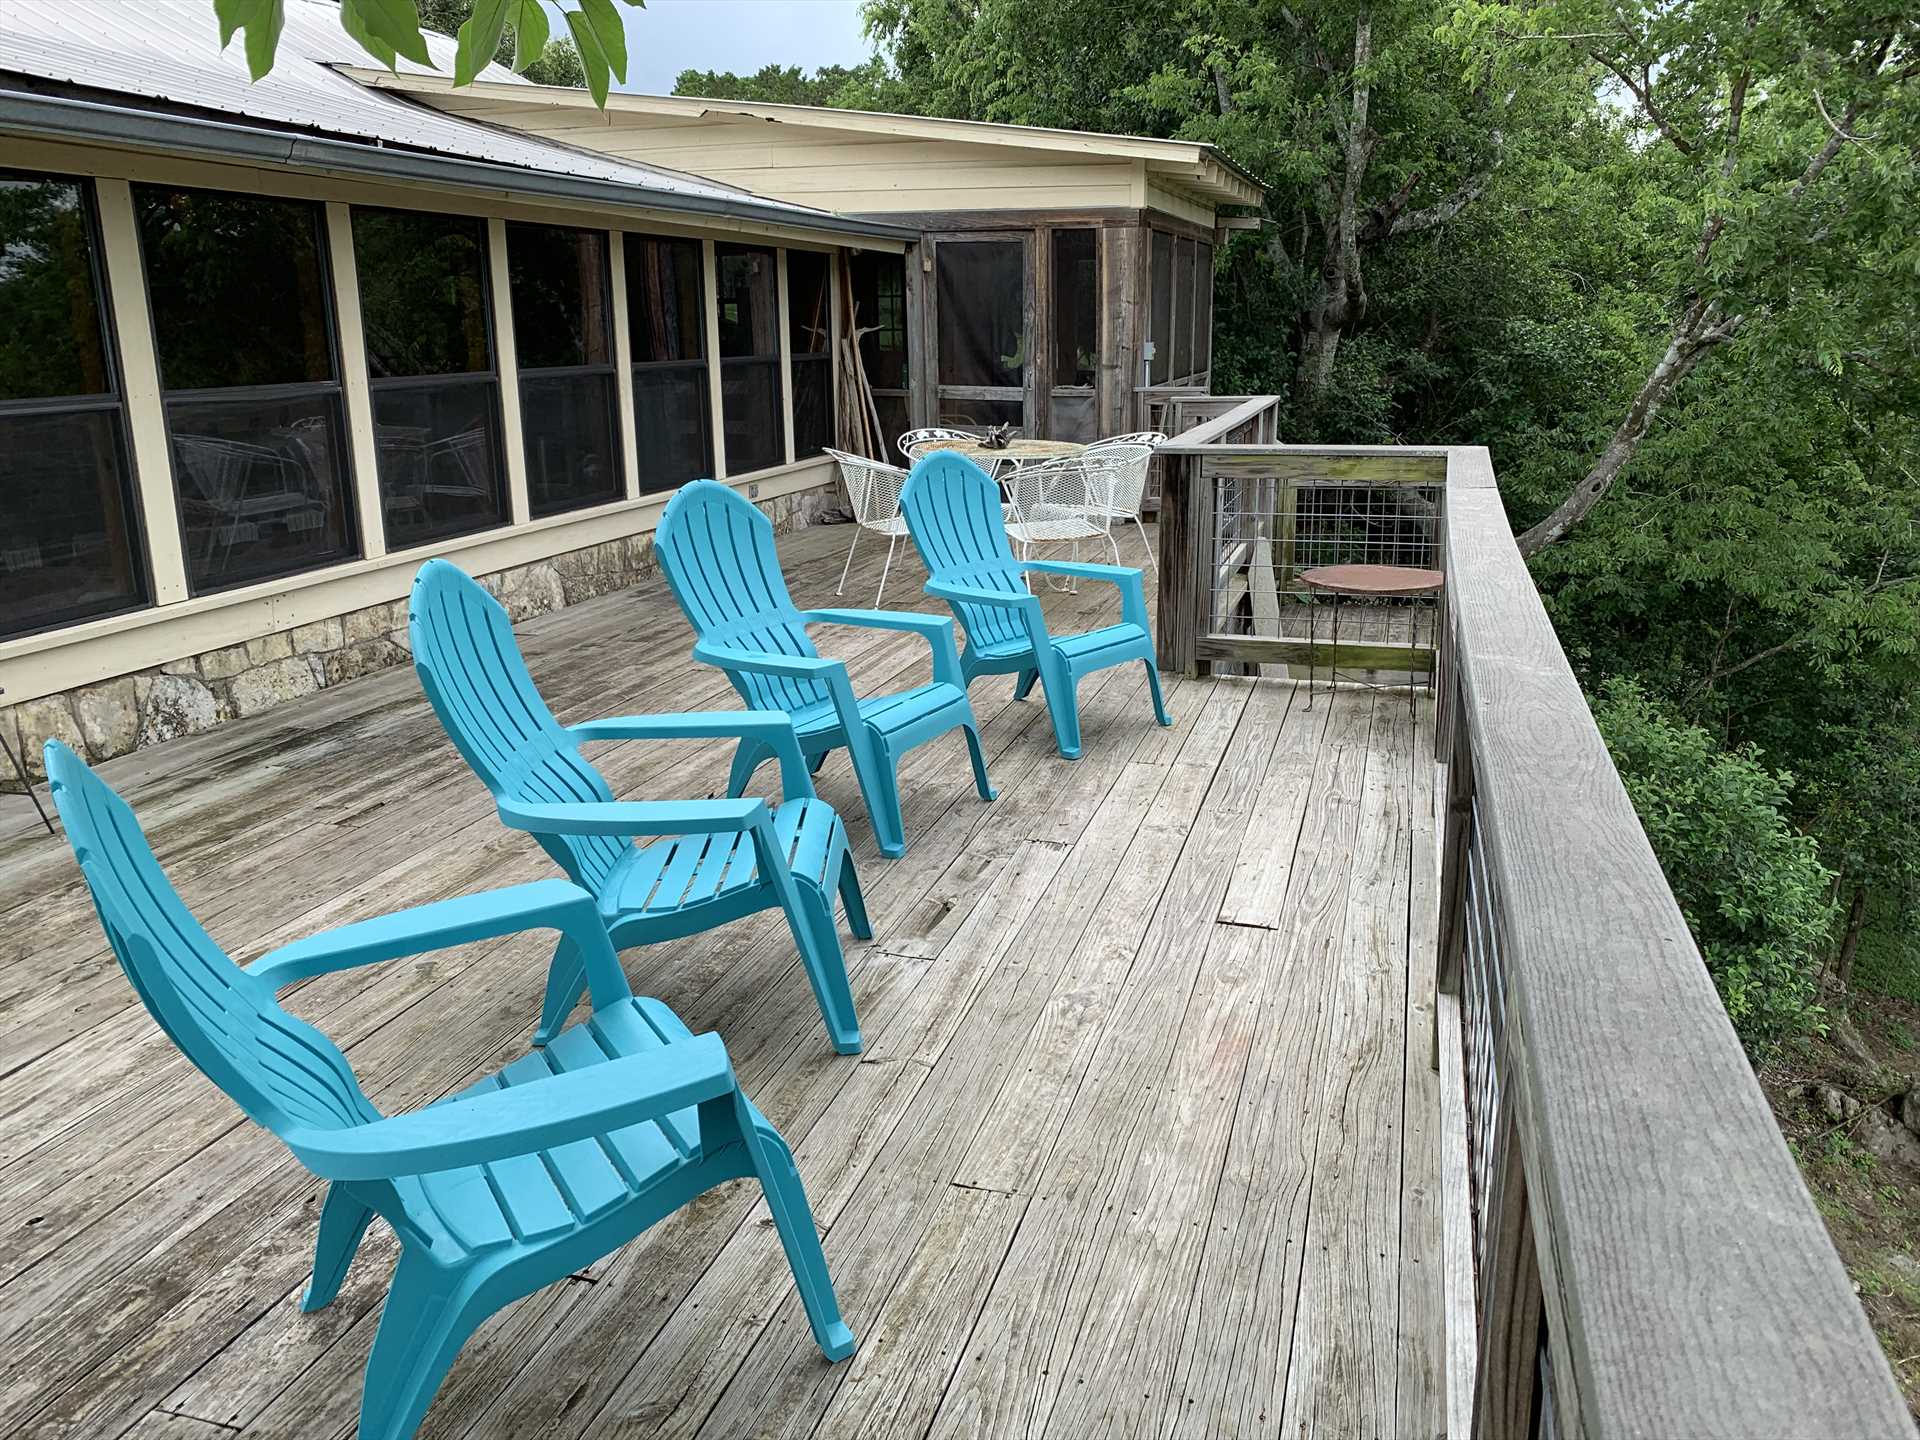                                                 The sunny back deck is a great spot to stargaze and enjoy panoramic Hill Country views.